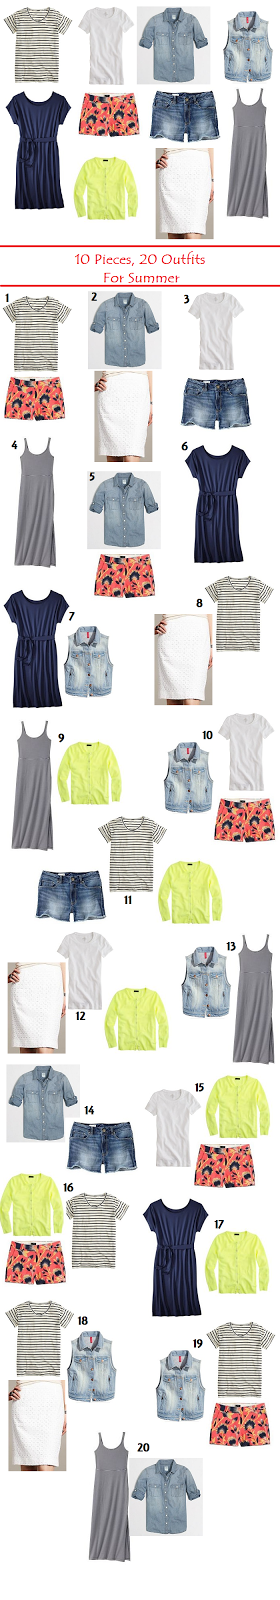 10 Pieces, 20 Outfits for Summer